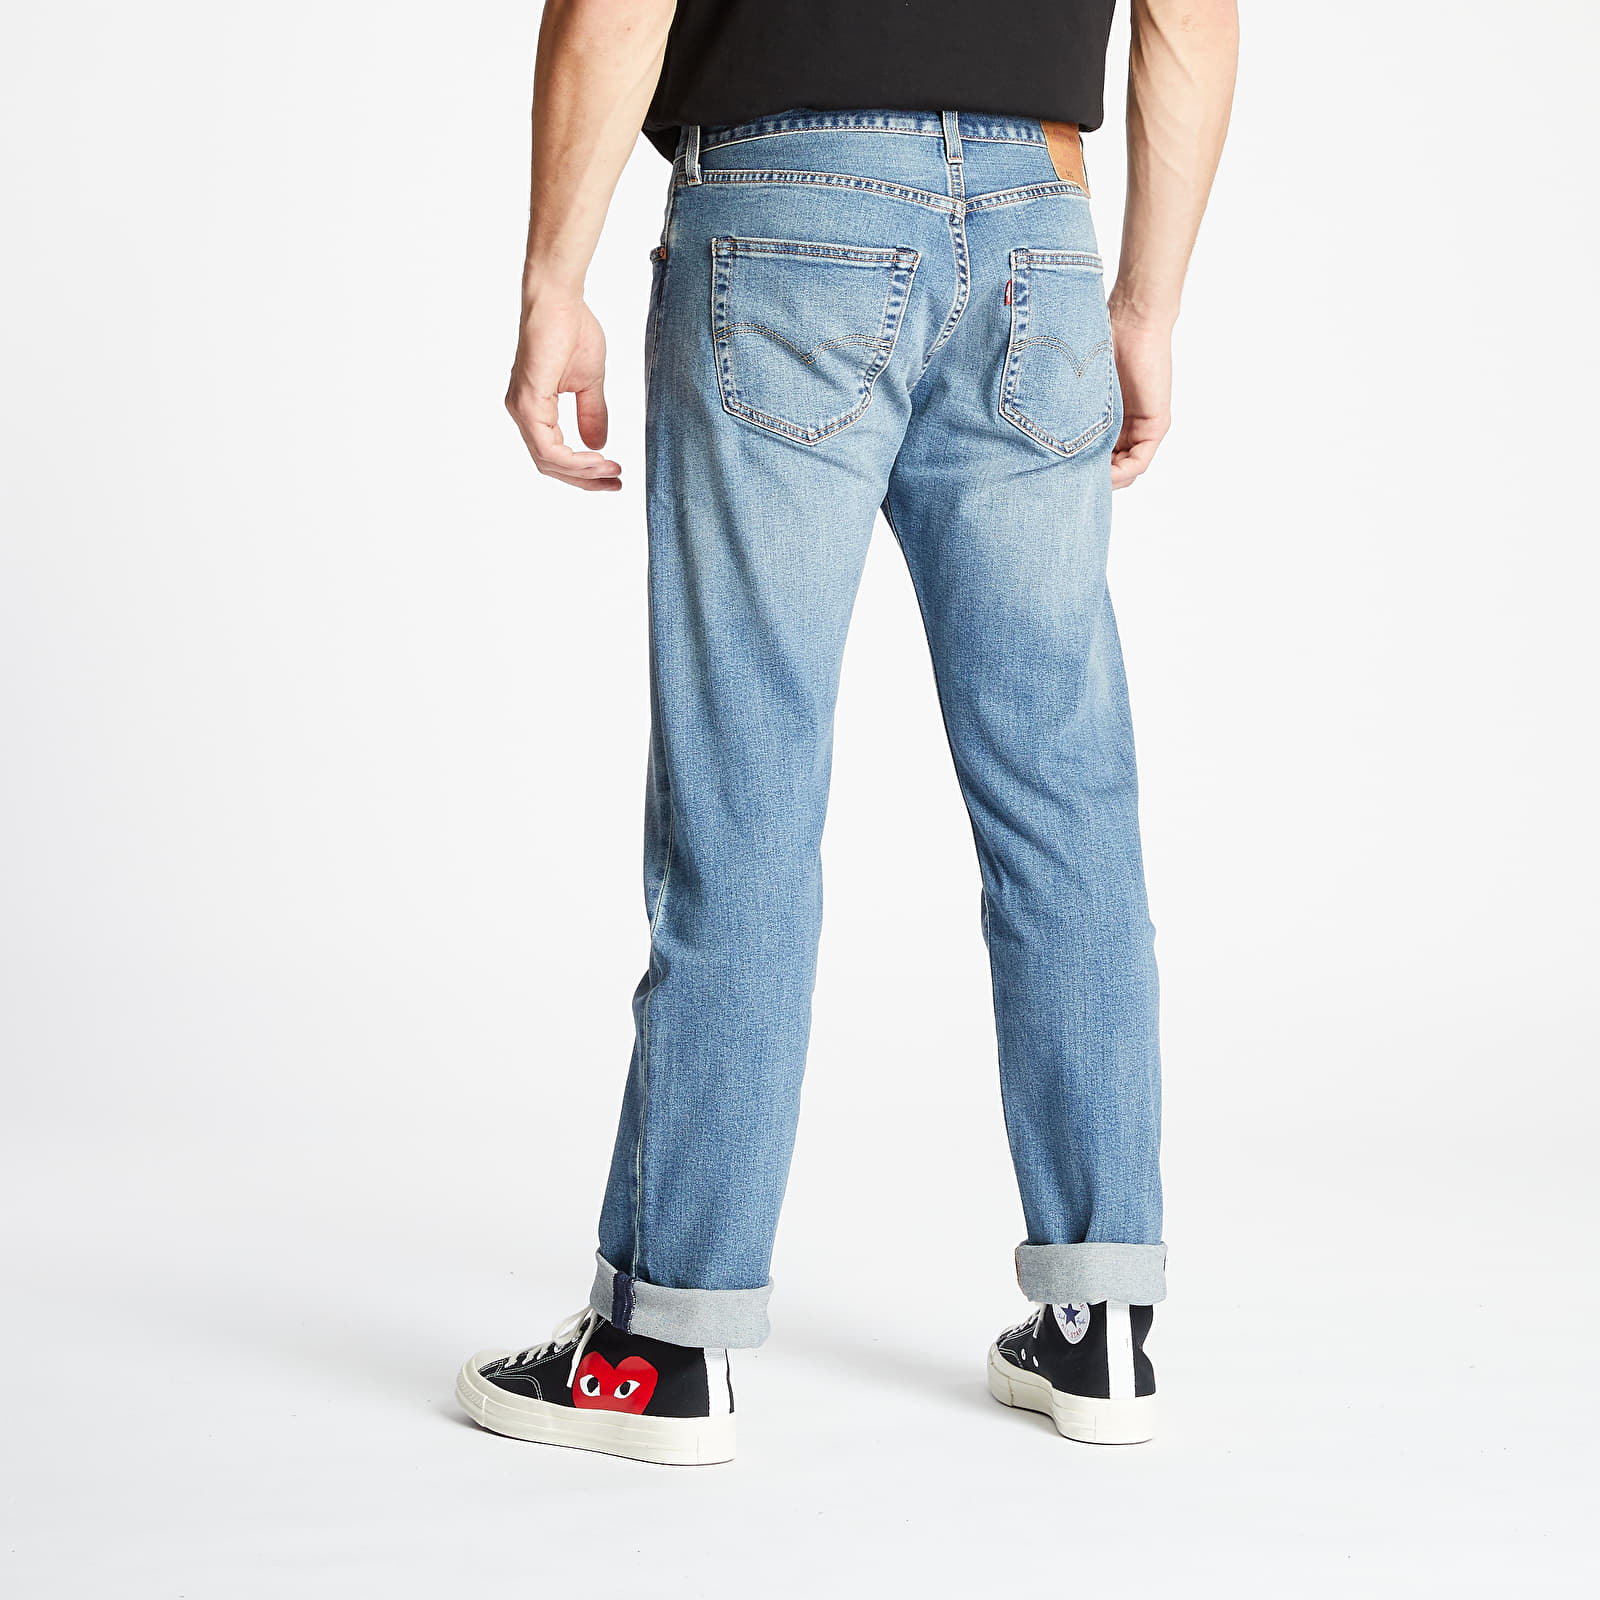 How to choose a pair of jeans | FTSHP Blog